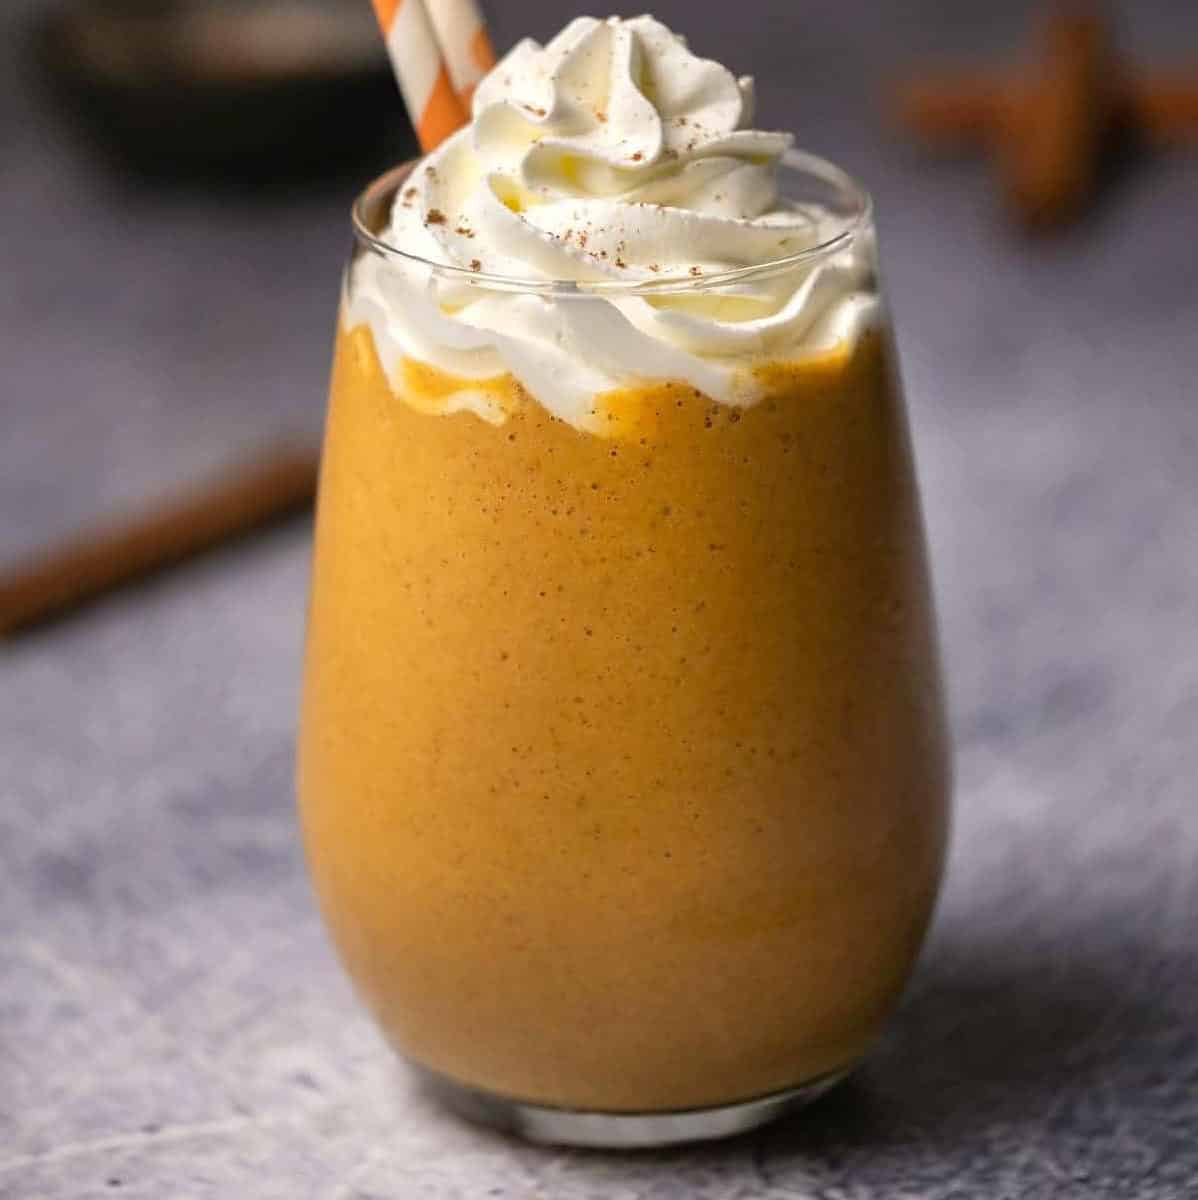  A perfect on-the-go breakfast, this smoothie is filled with plant-based protein and comforting pumpkin flavor.